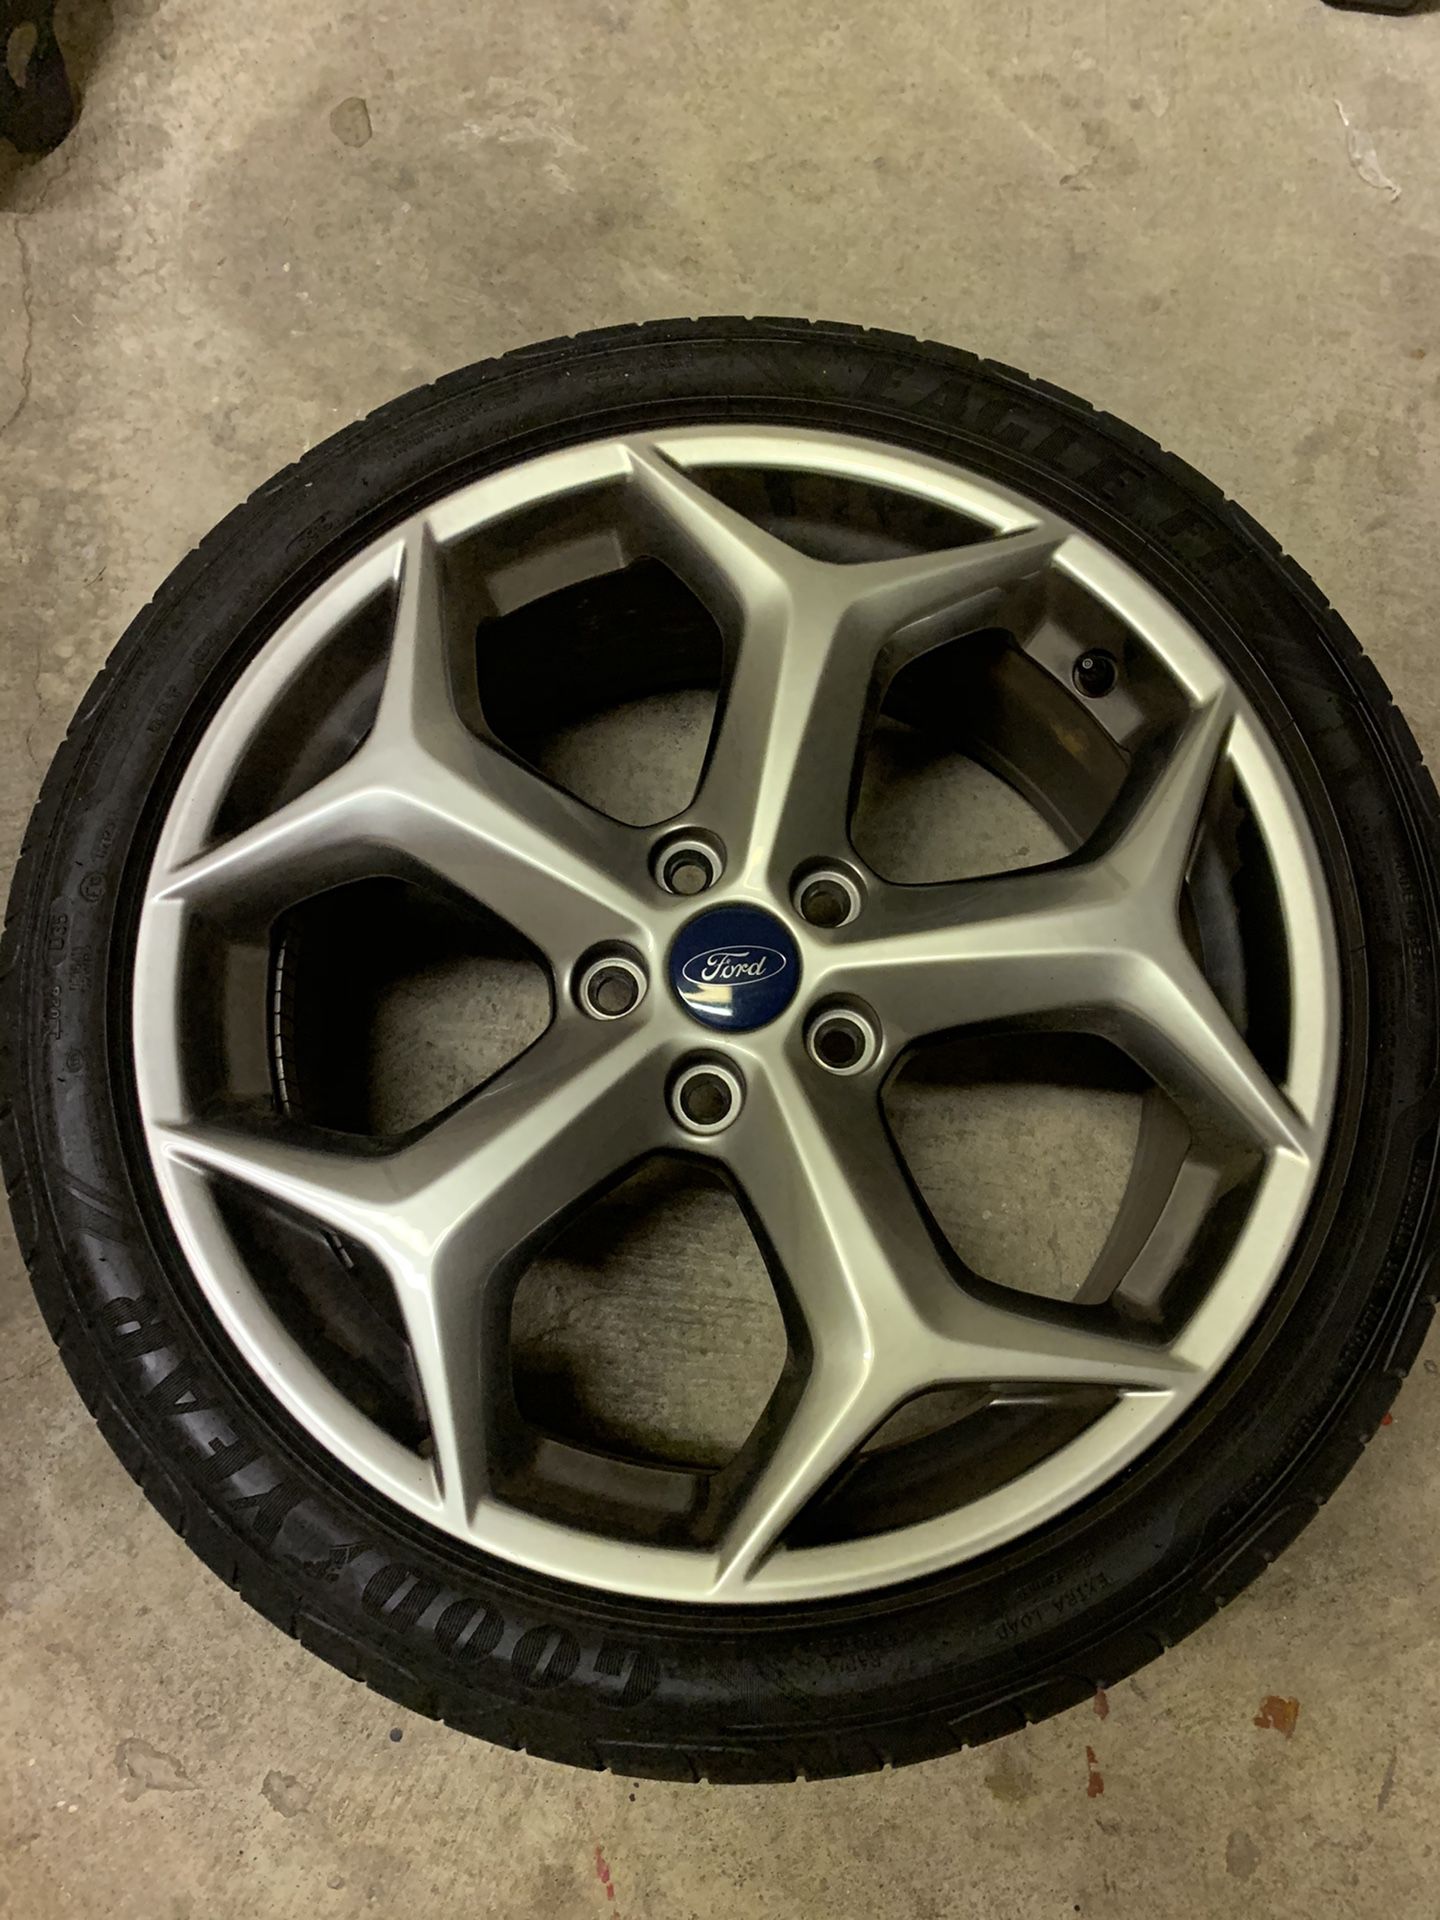 18” stock wheels and tires from Ford Focus ST